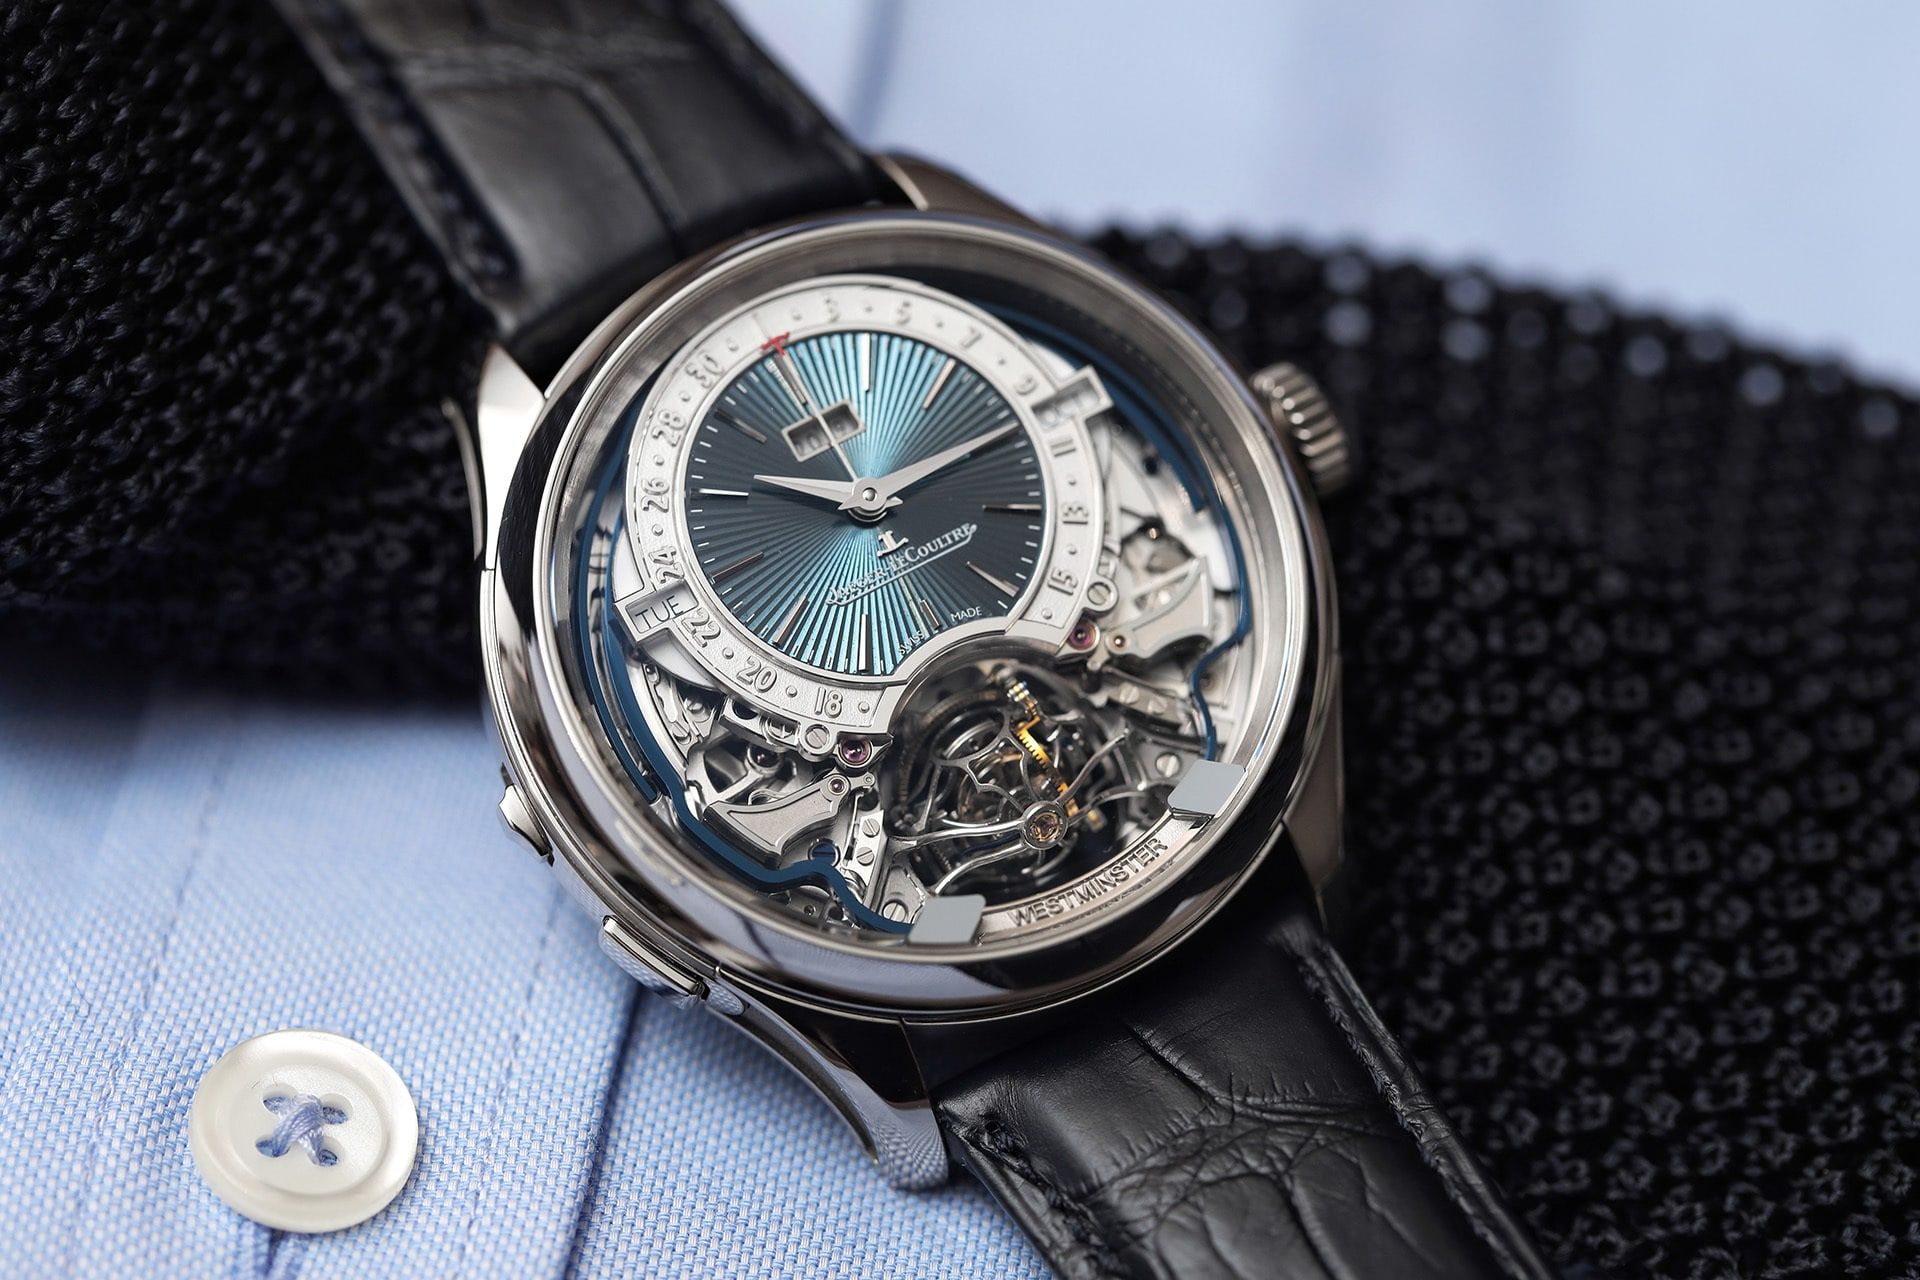 Jaeger-LeCoultre fifth gyrotourbillon is a star in this masterful watch full of complications